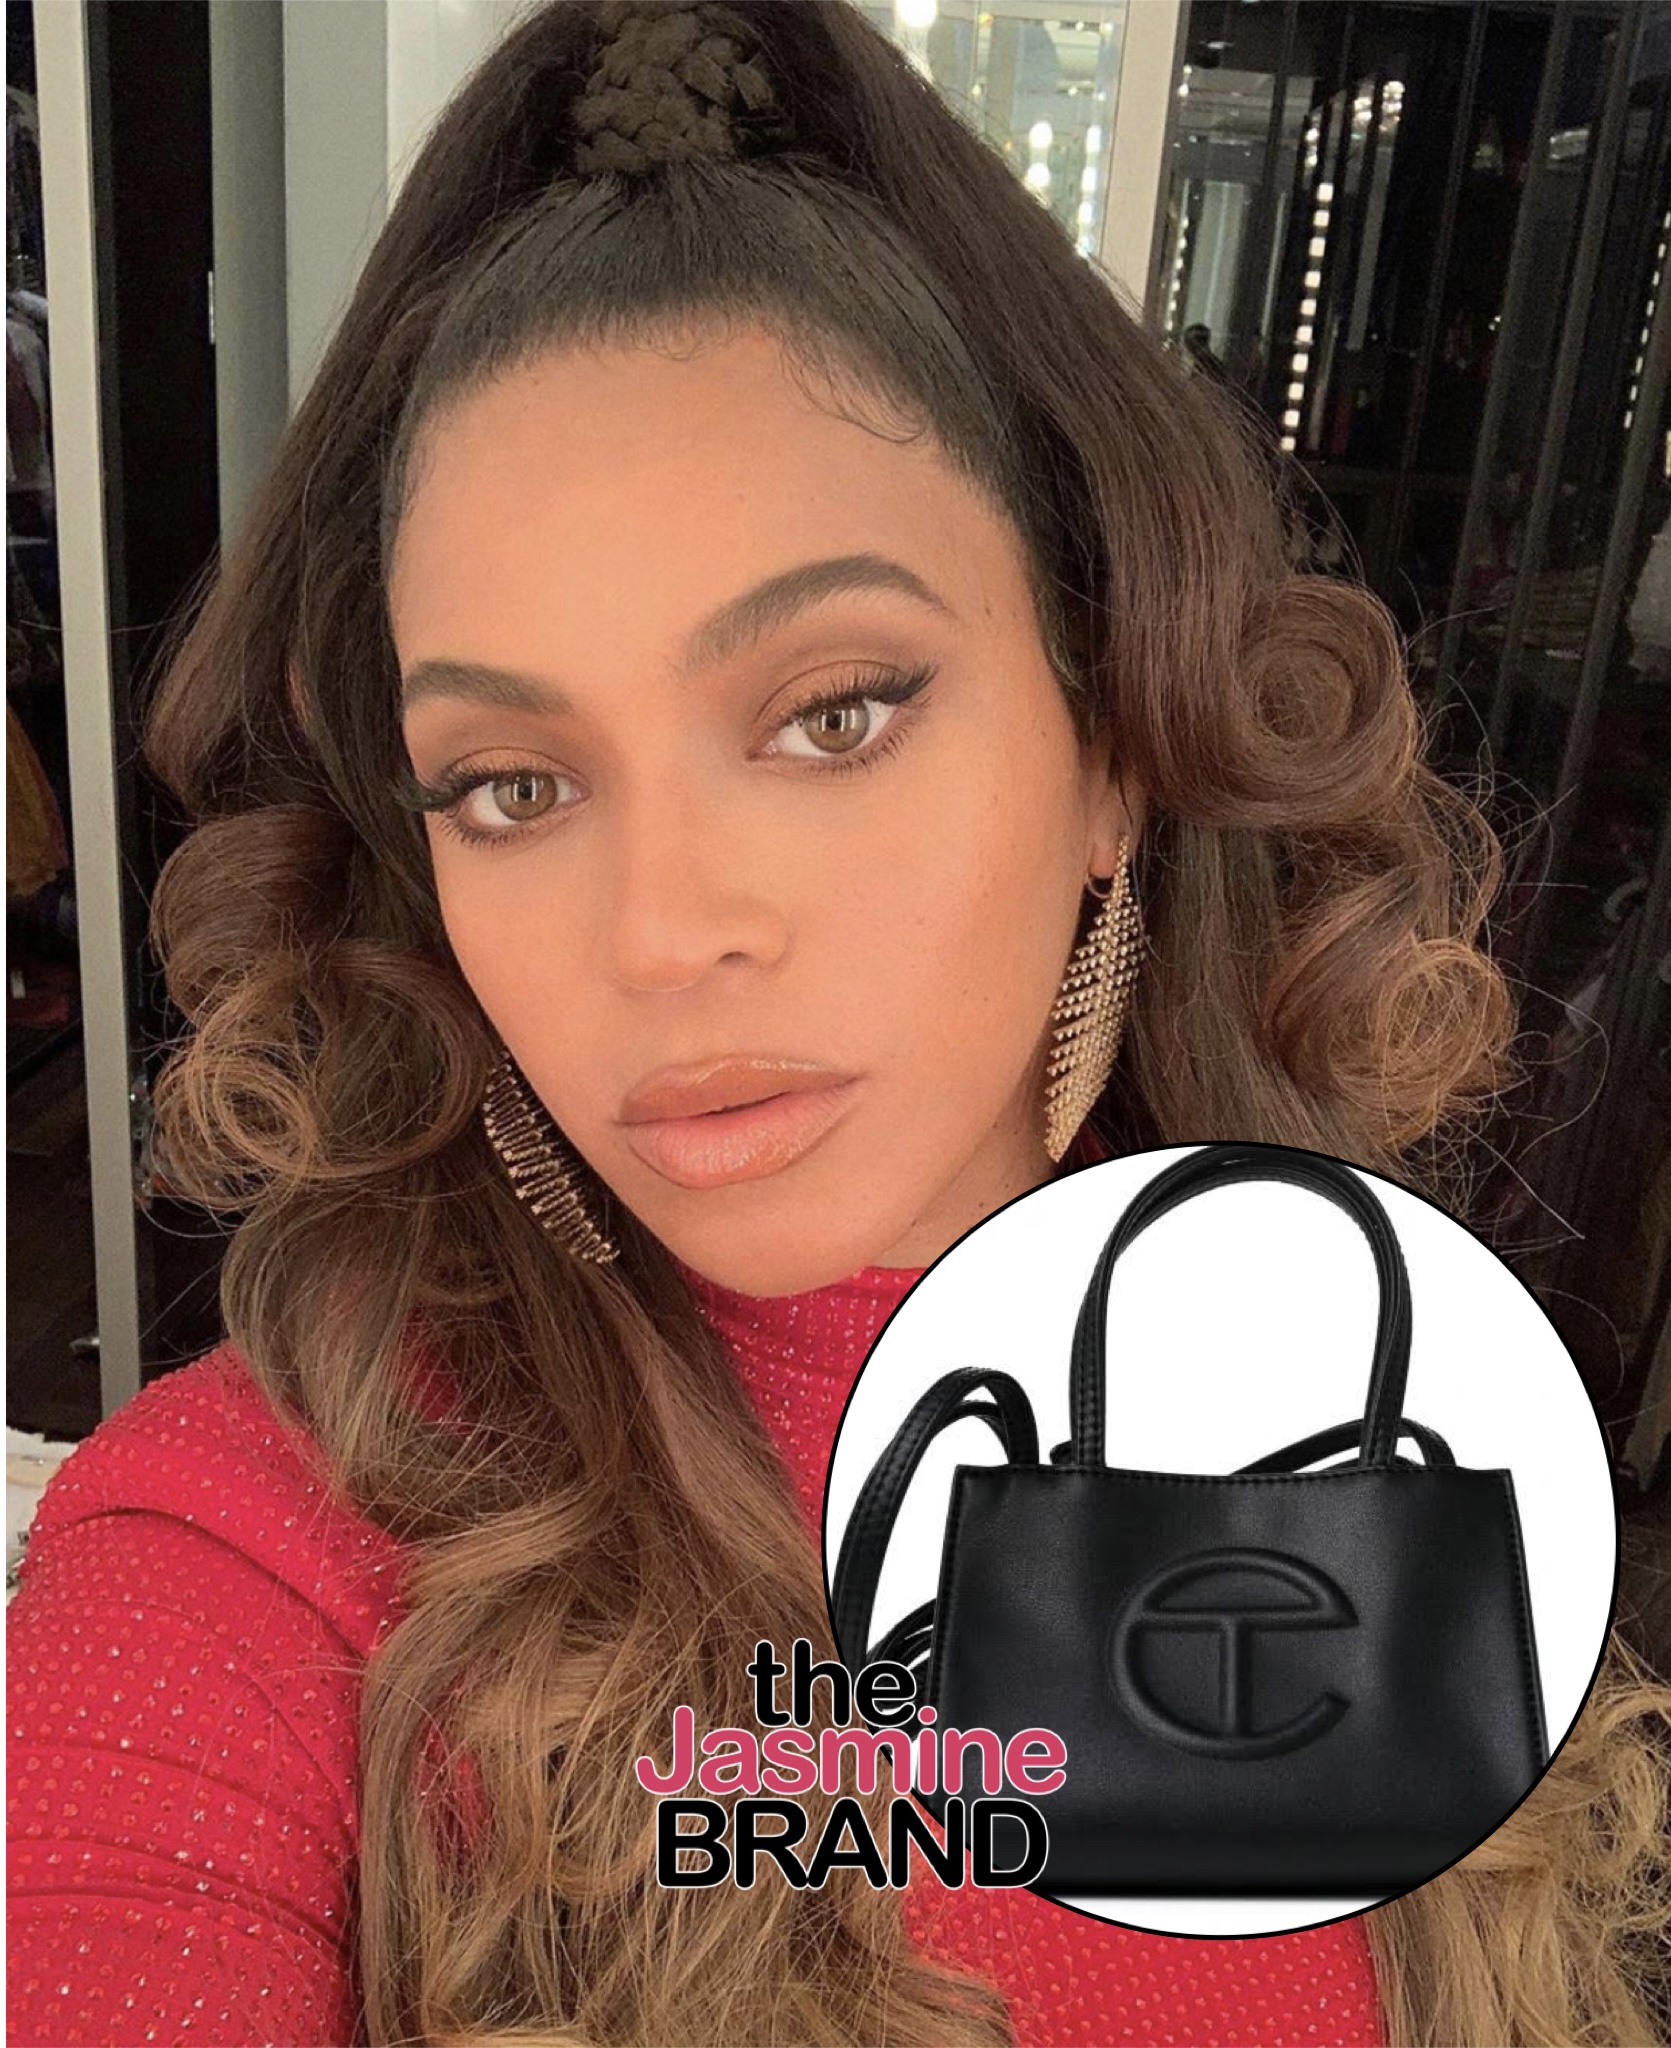 How to get a Telfar Bag? Price, where to buy, and more, as Beyoncé sparks  frenzy online